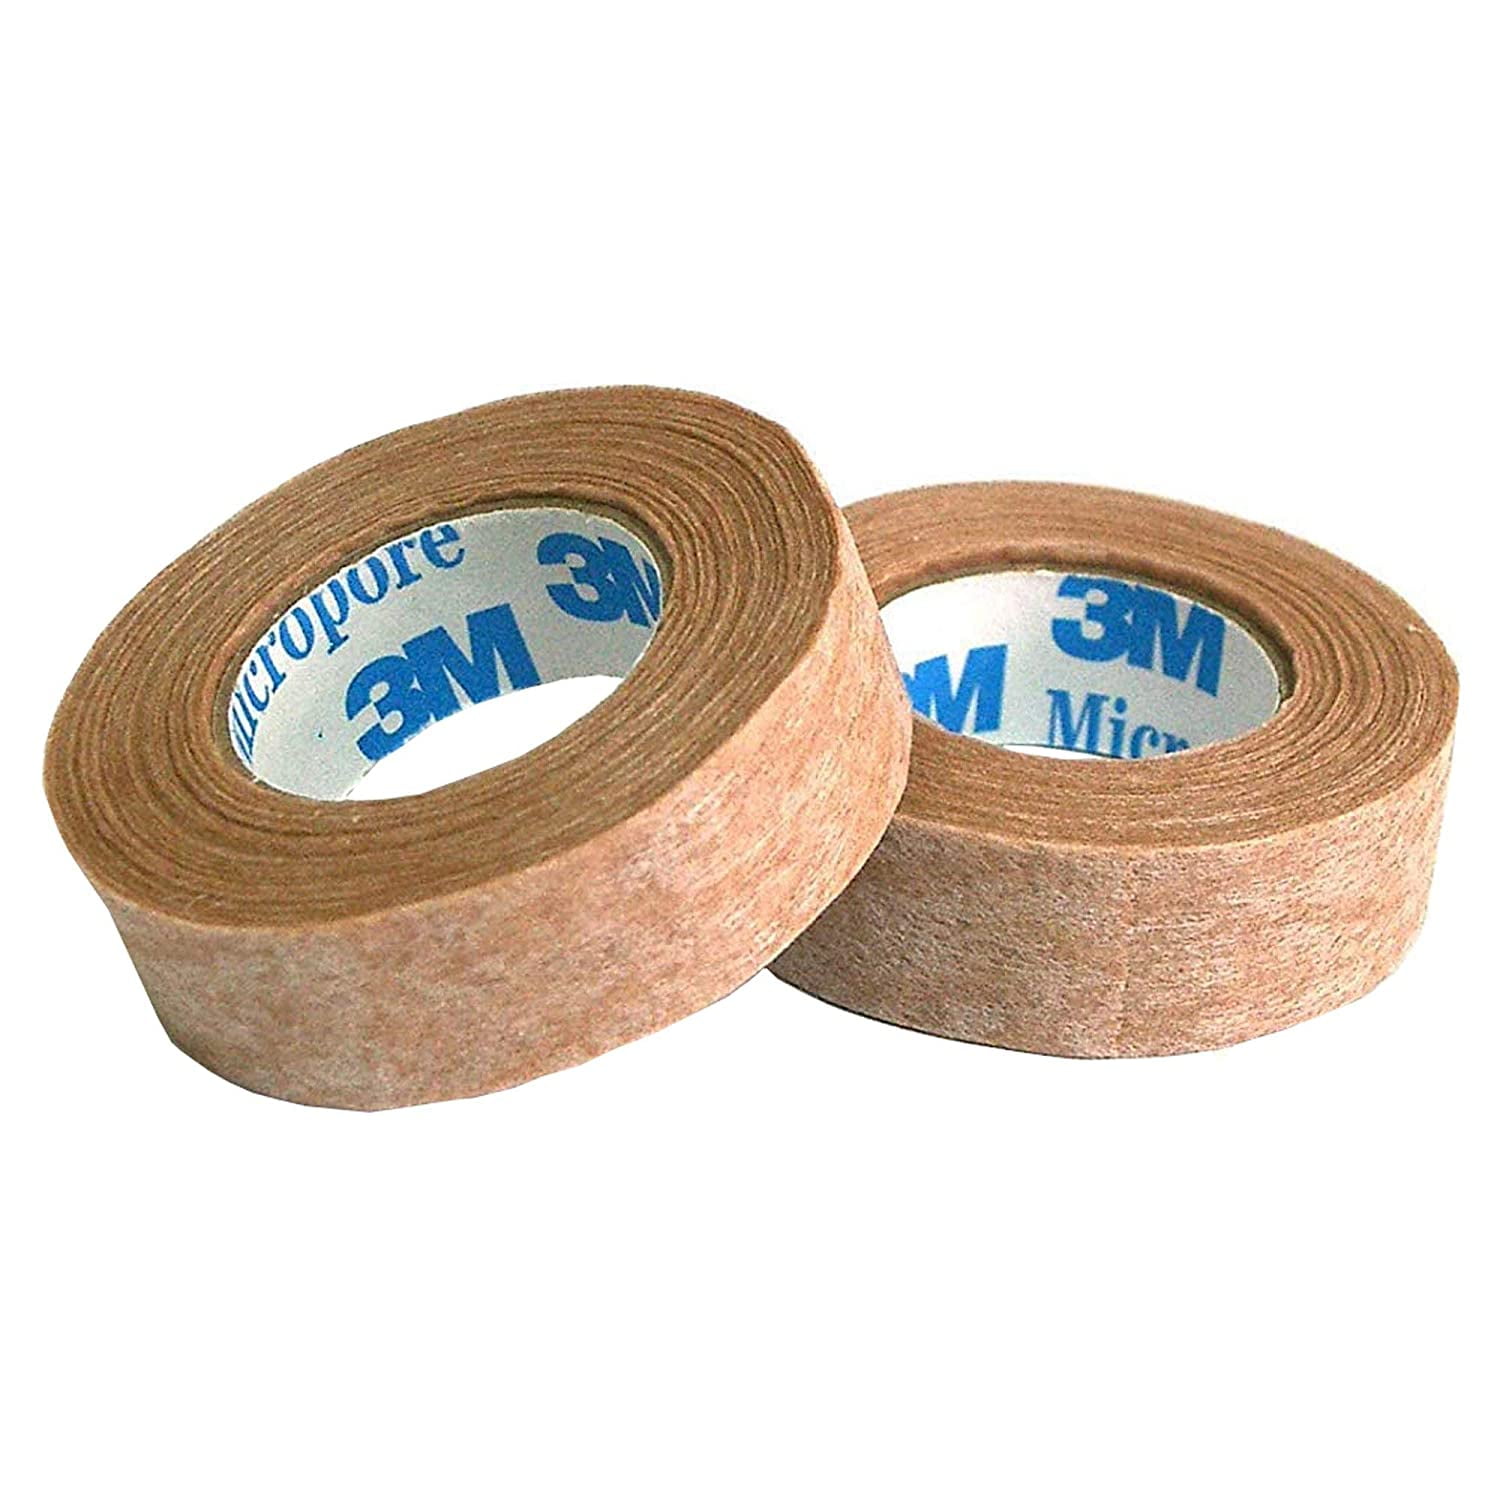 Micropore Paper Tape Plus 1 Inch x 1.5 Yards Short 3M 1532S1- Box/100